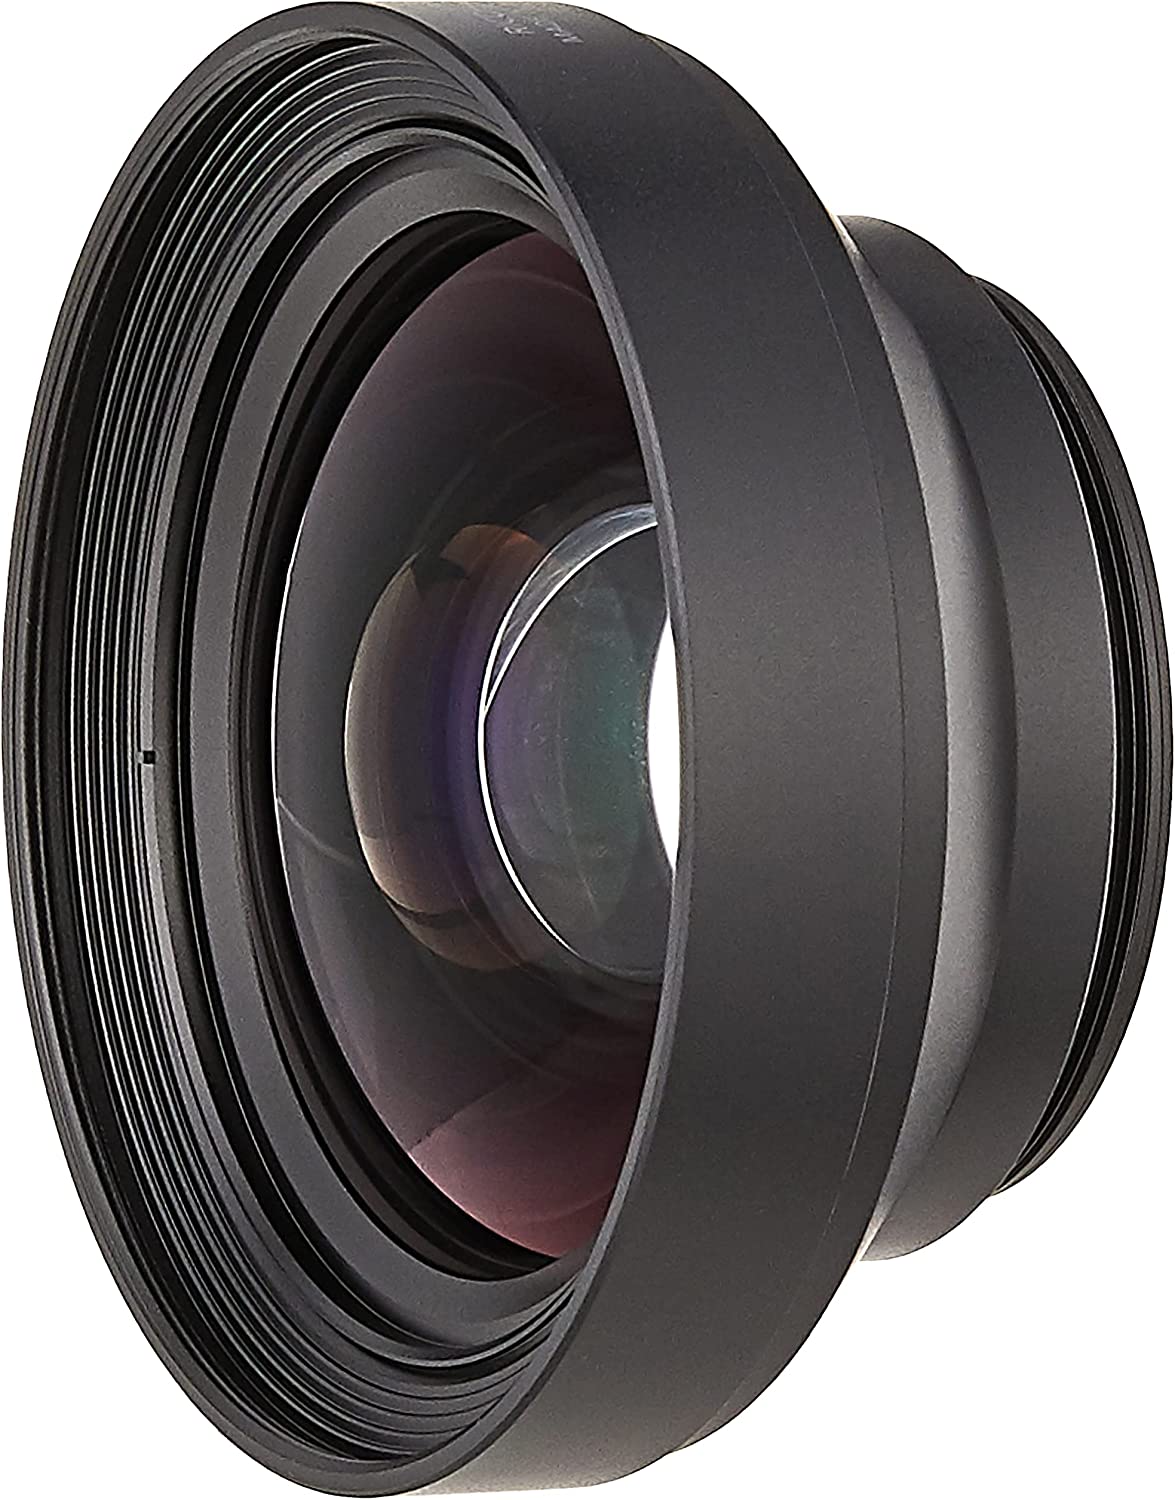 Product Image of Ricoh GW-4 Wide Conversion Lens for GRIII